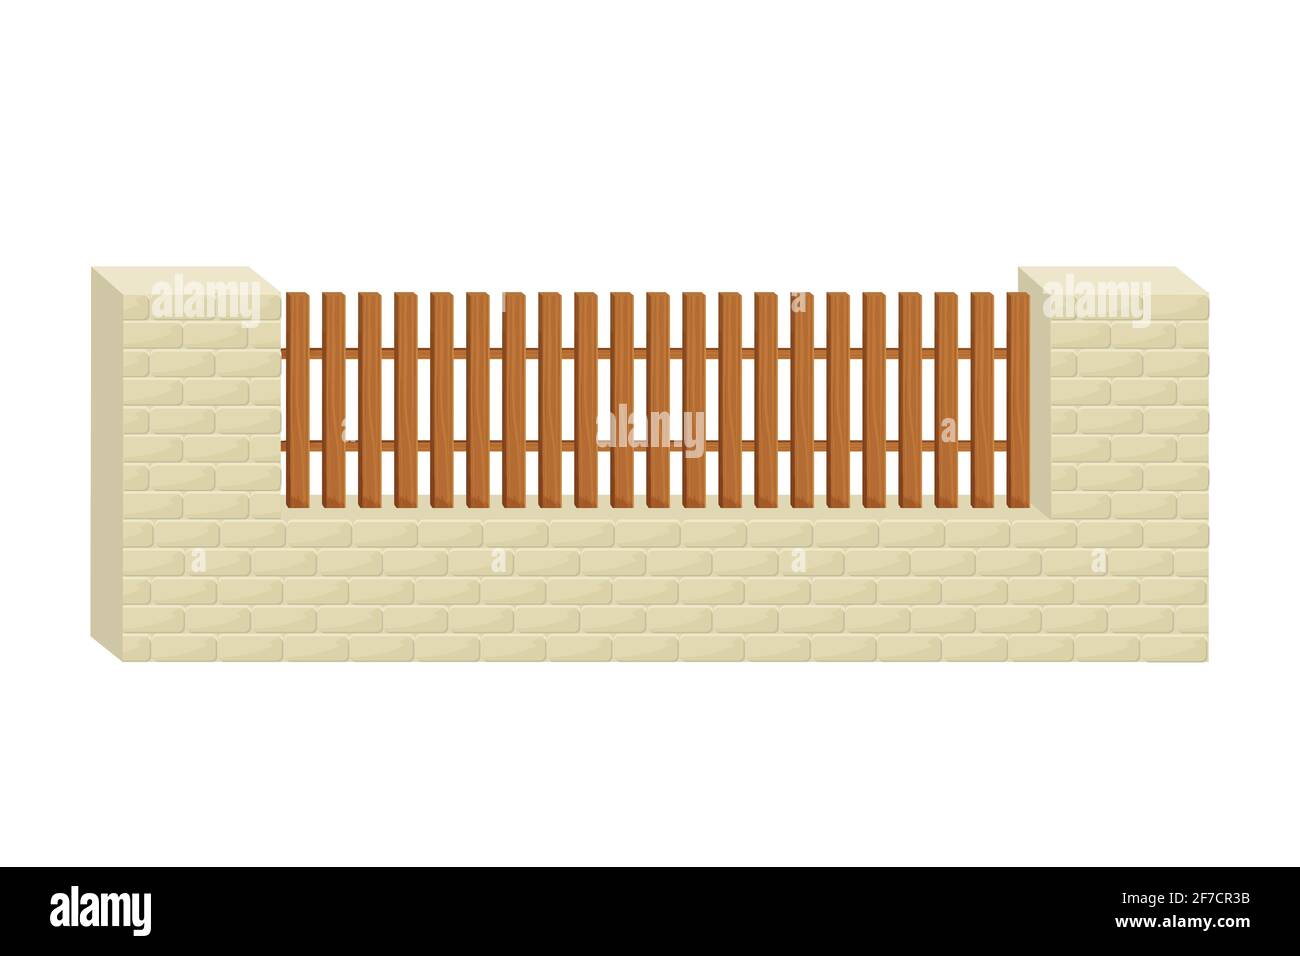 Fence from stone bricks and wooden planks in cartoon flat style isolated on white background. Building, construction for protection. Design element. Stock Vector illustration Stock Vector